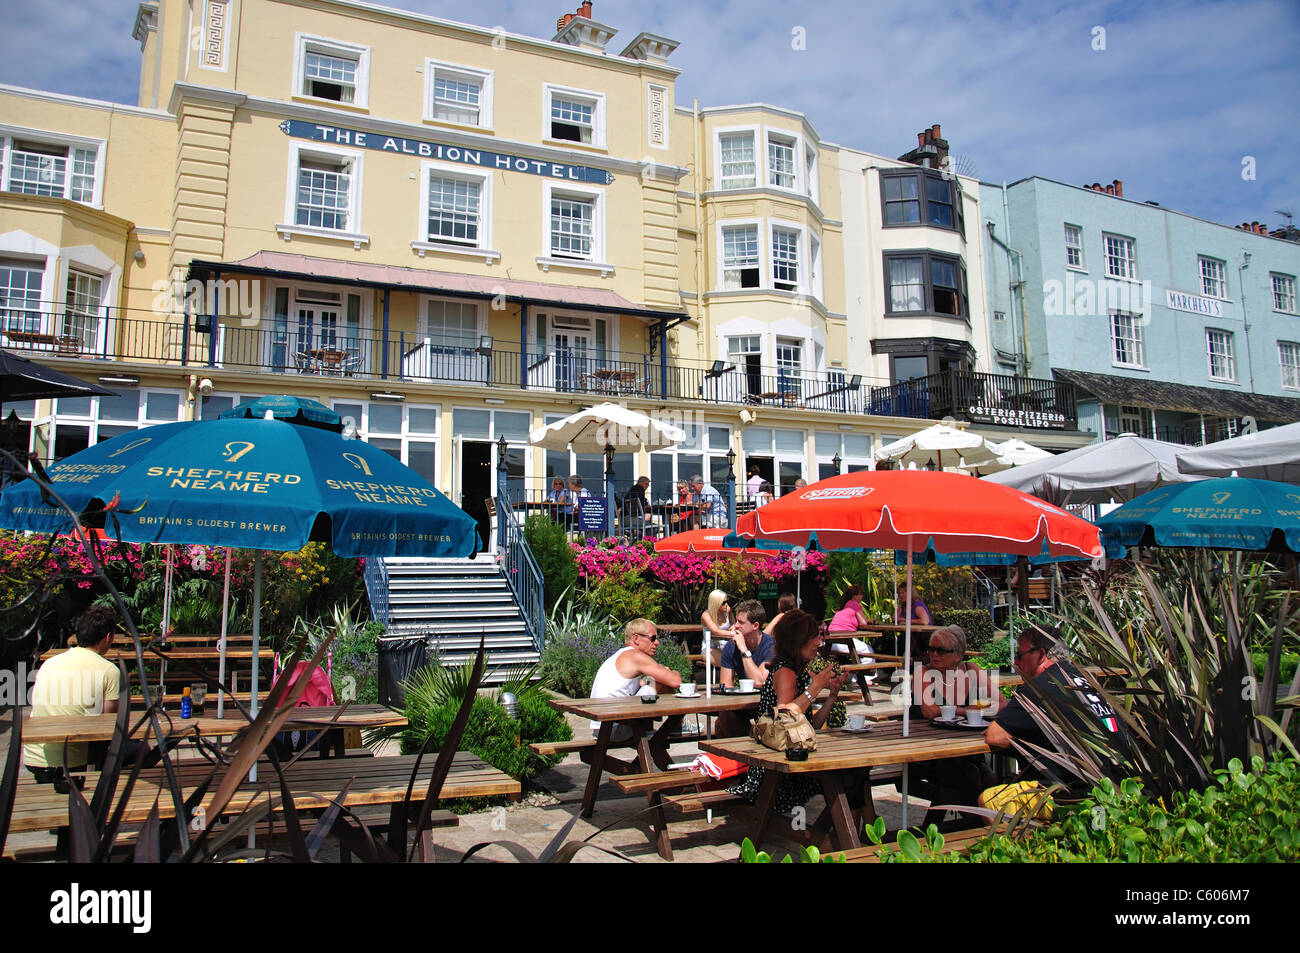 L'Albion Hotel beer garden, Broadstairs, isola di Thanet, Thanet distretto, Kent, England, Regno Unito Foto Stock